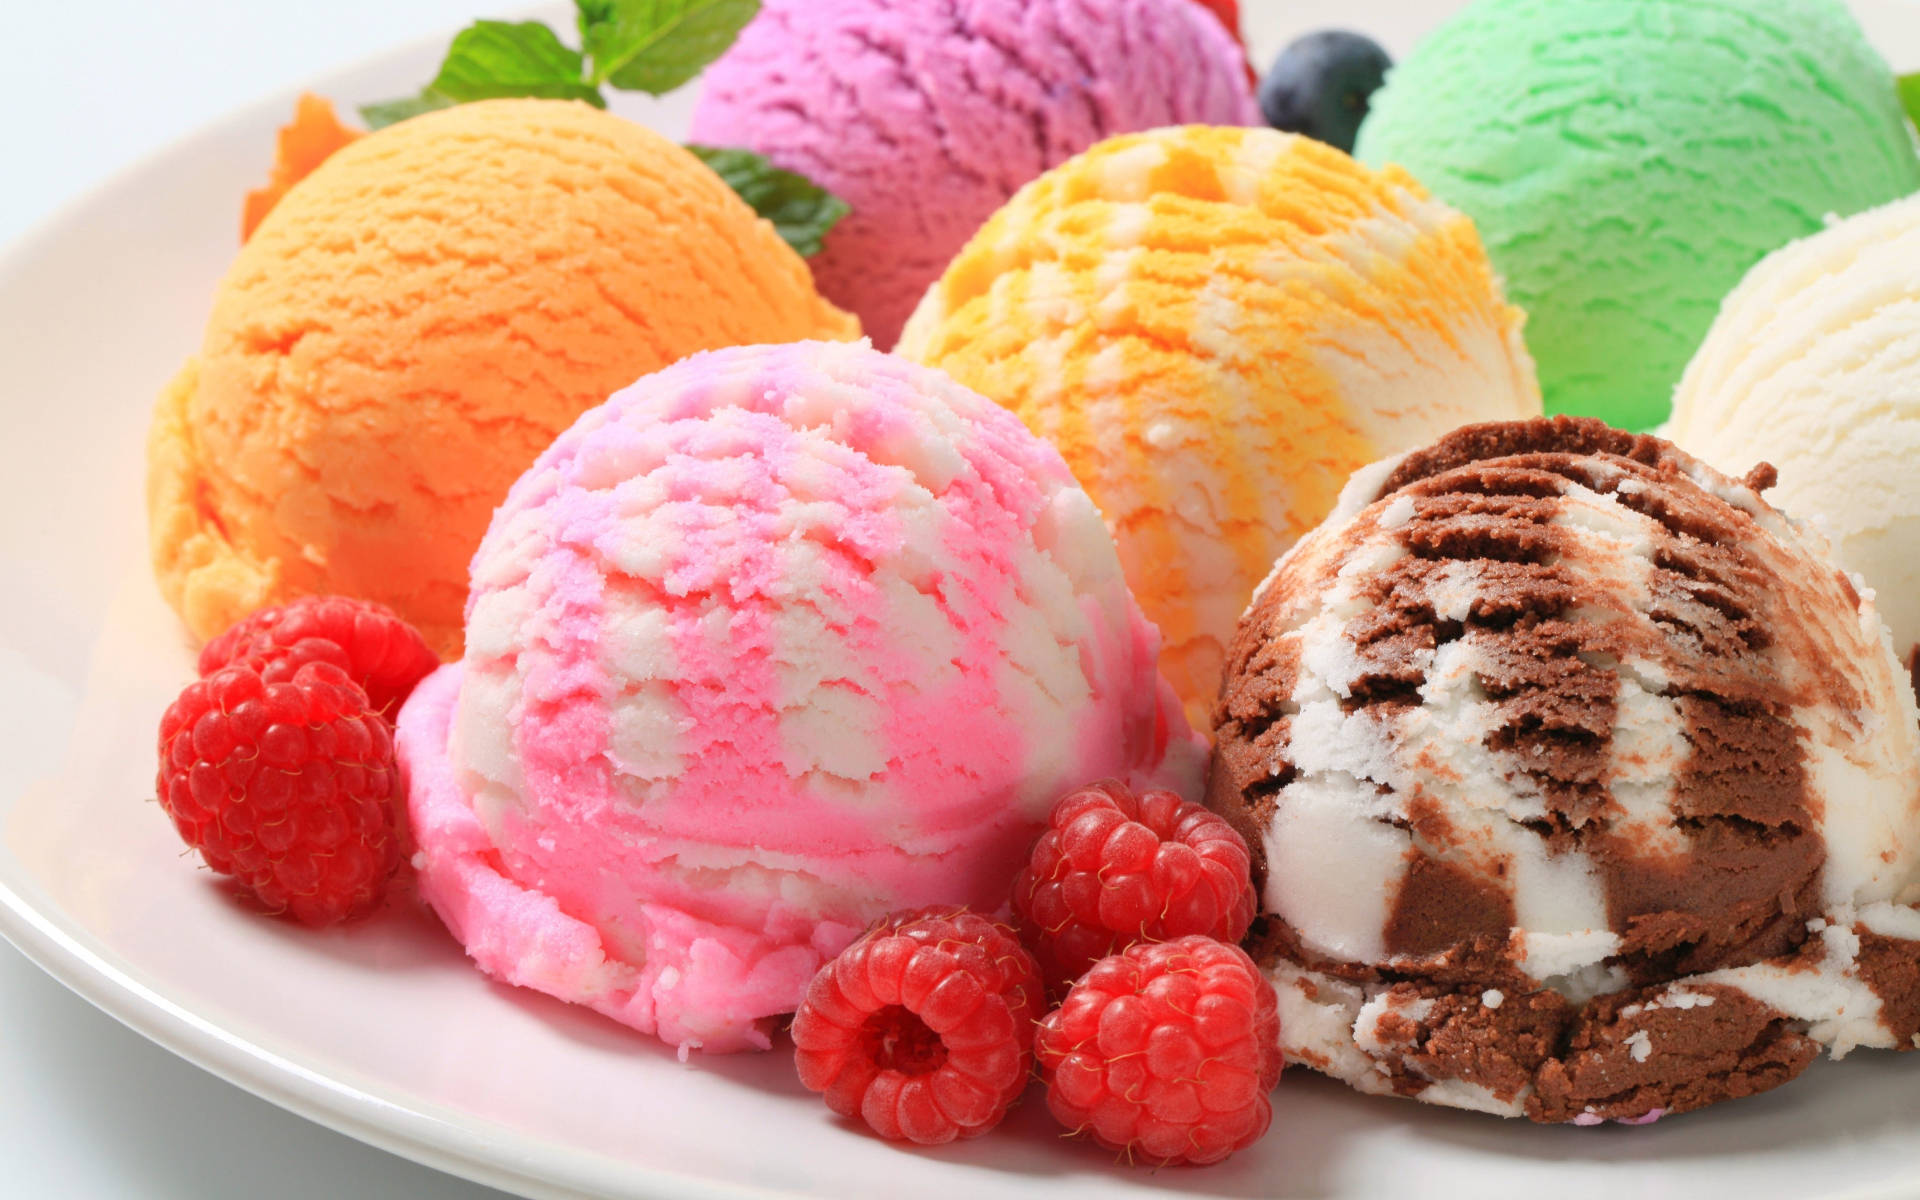 Assorted Ice Creams And Berries Background